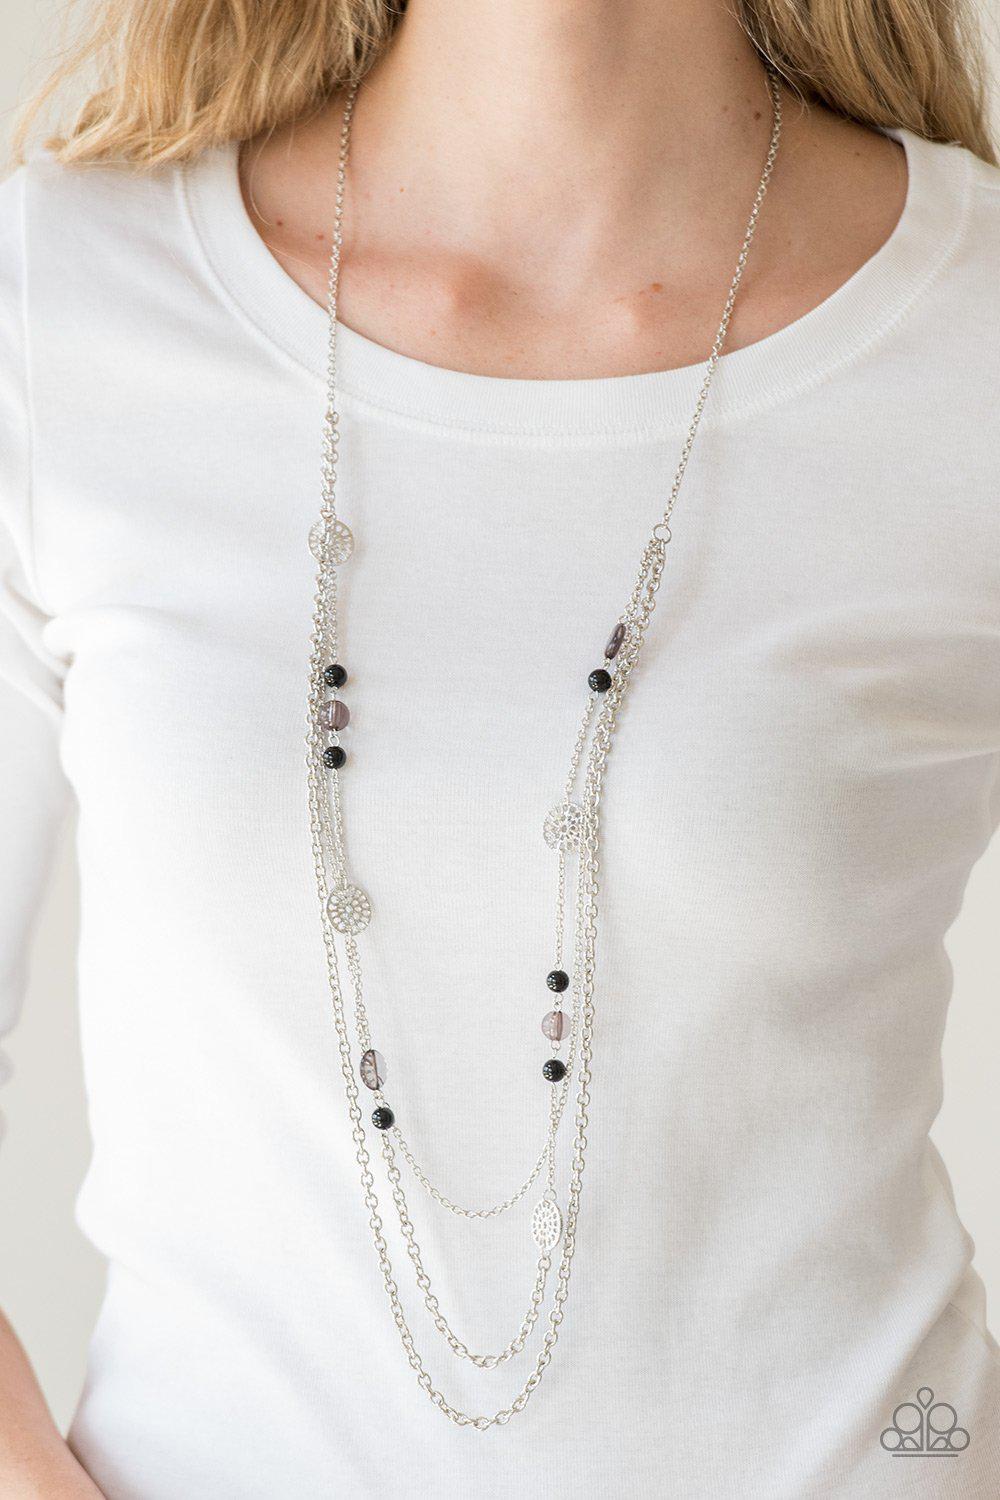 Pretty Pop-tastic! Black and Silver Necklace and matching Earrings - Paparazzi Accessories-CarasShop.com - $5 Jewelry by Cara Jewels